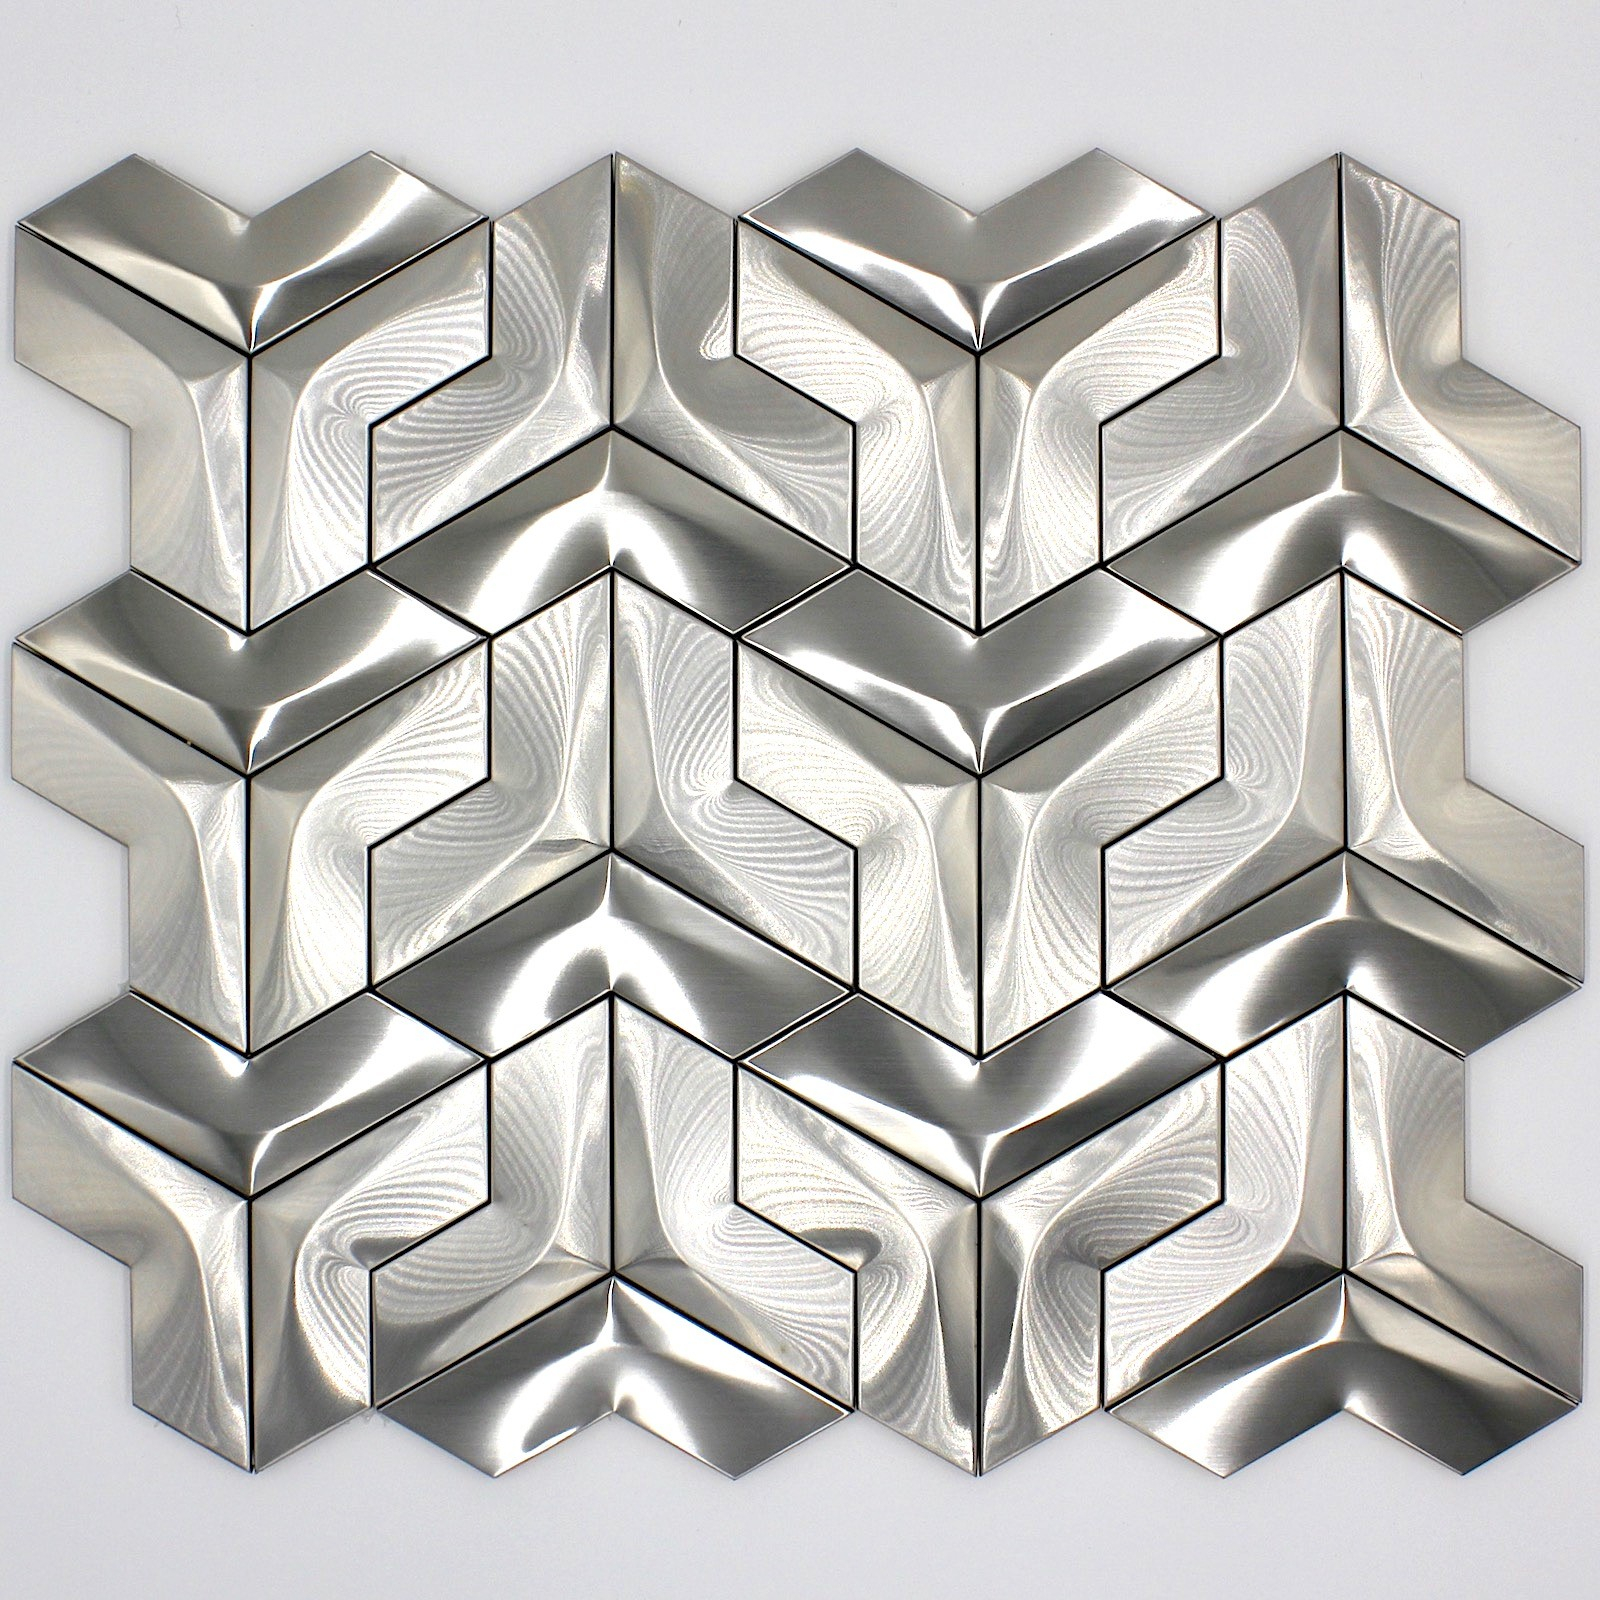 Wall Mosaic Stainless Steel Tile In Parma pertaining to dimensions 1600 X 1600